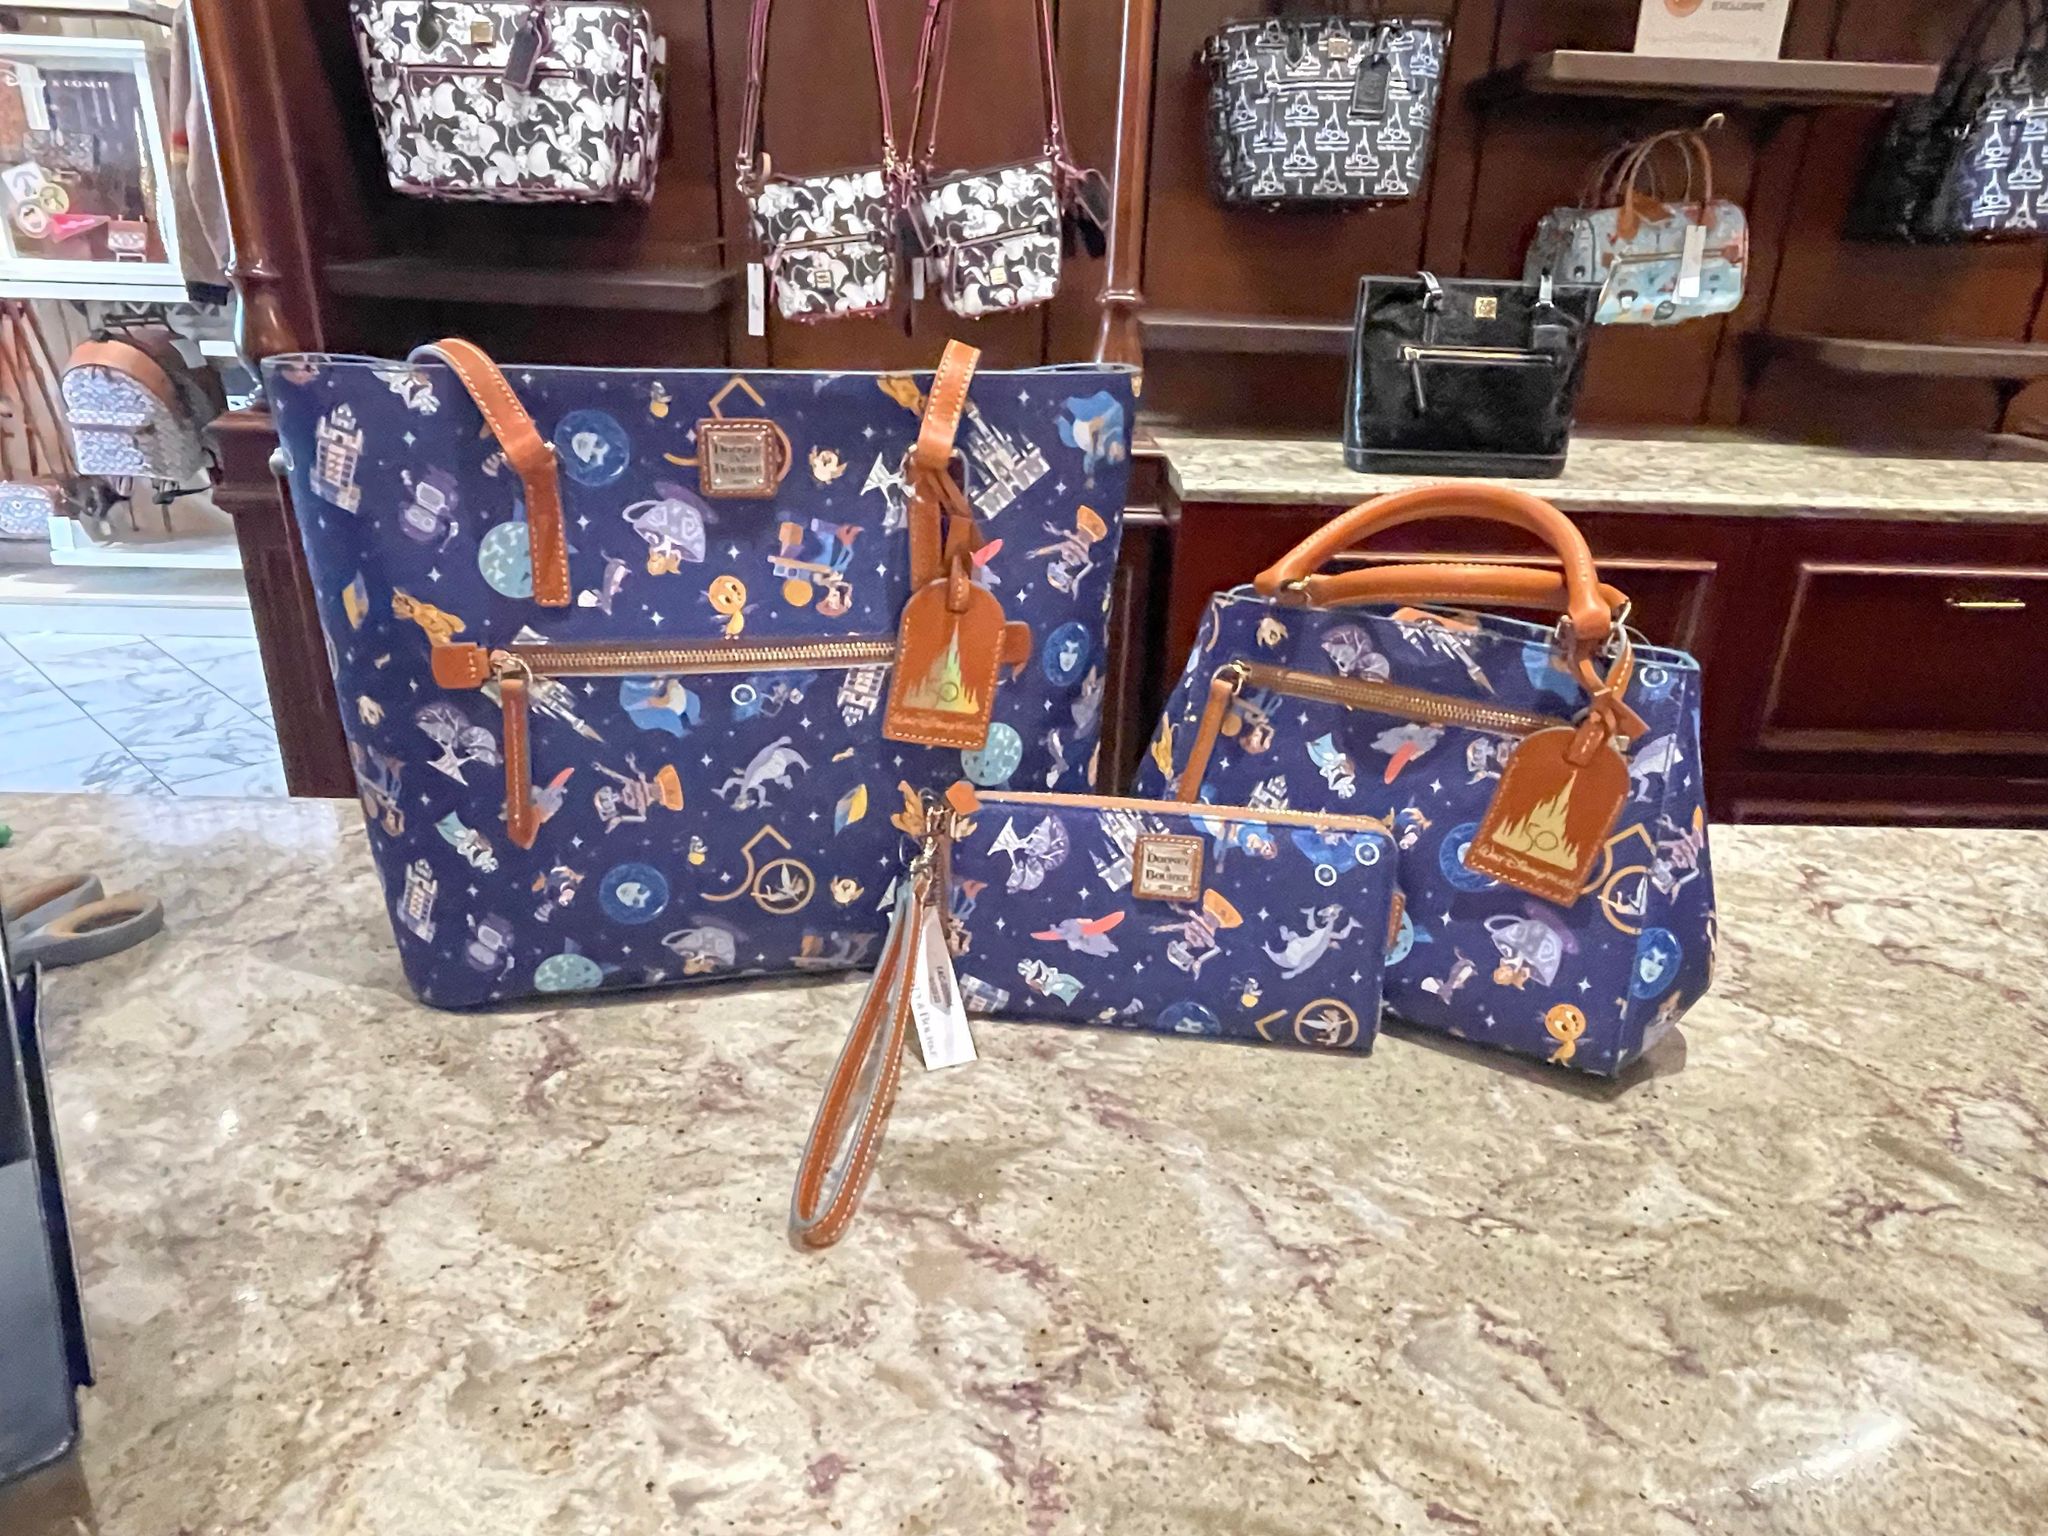 NEW! 50th Anniversary Dooney & Bourke Bags NOW at Uptown Jewelers in Magic  Kingdom - MickeyBlog.com